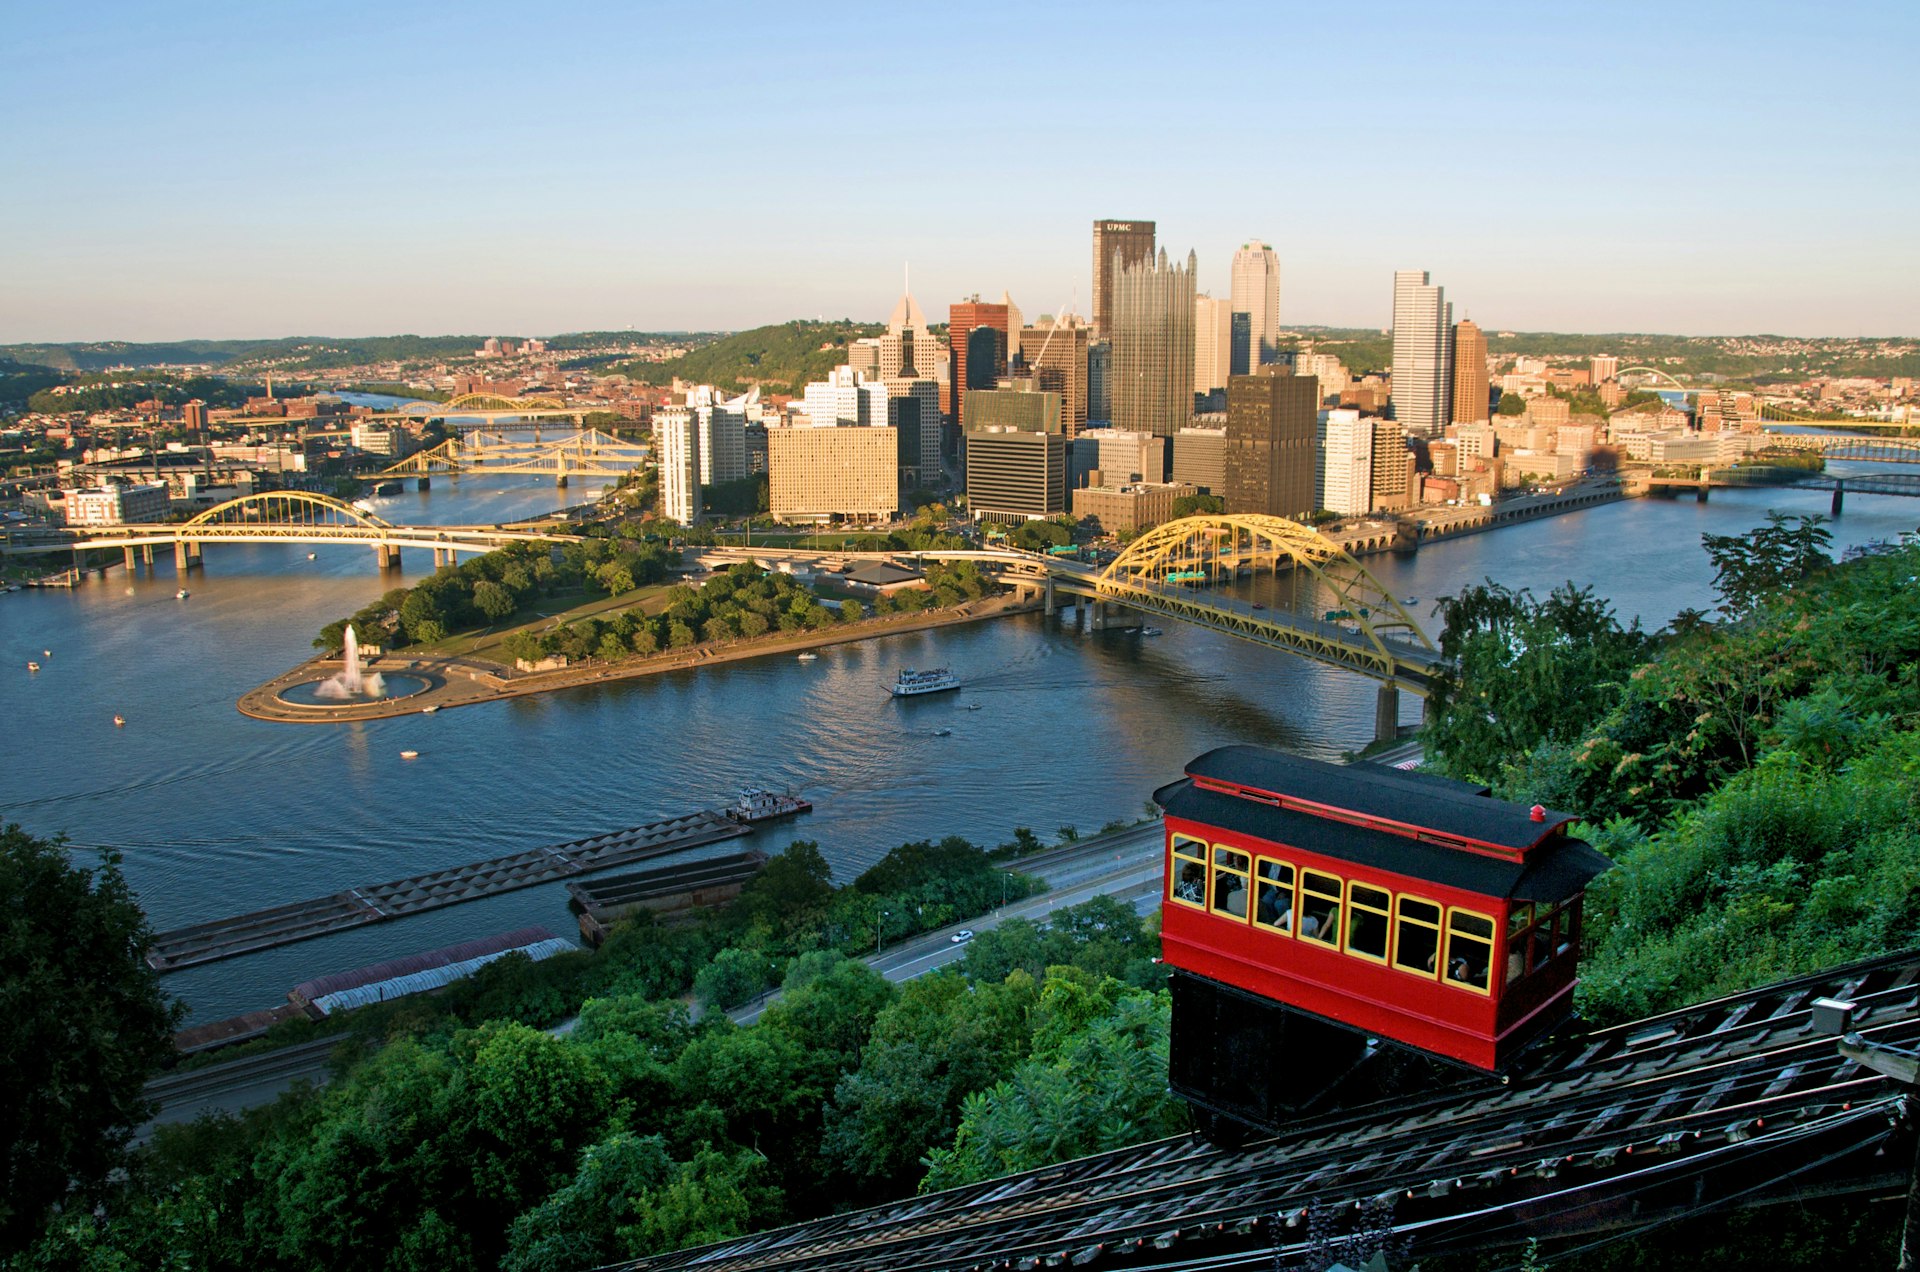 A small railway car with yellow trimmings on the windows glides down a tracked incline. In the background you can see the Pittsburgh skyline. 